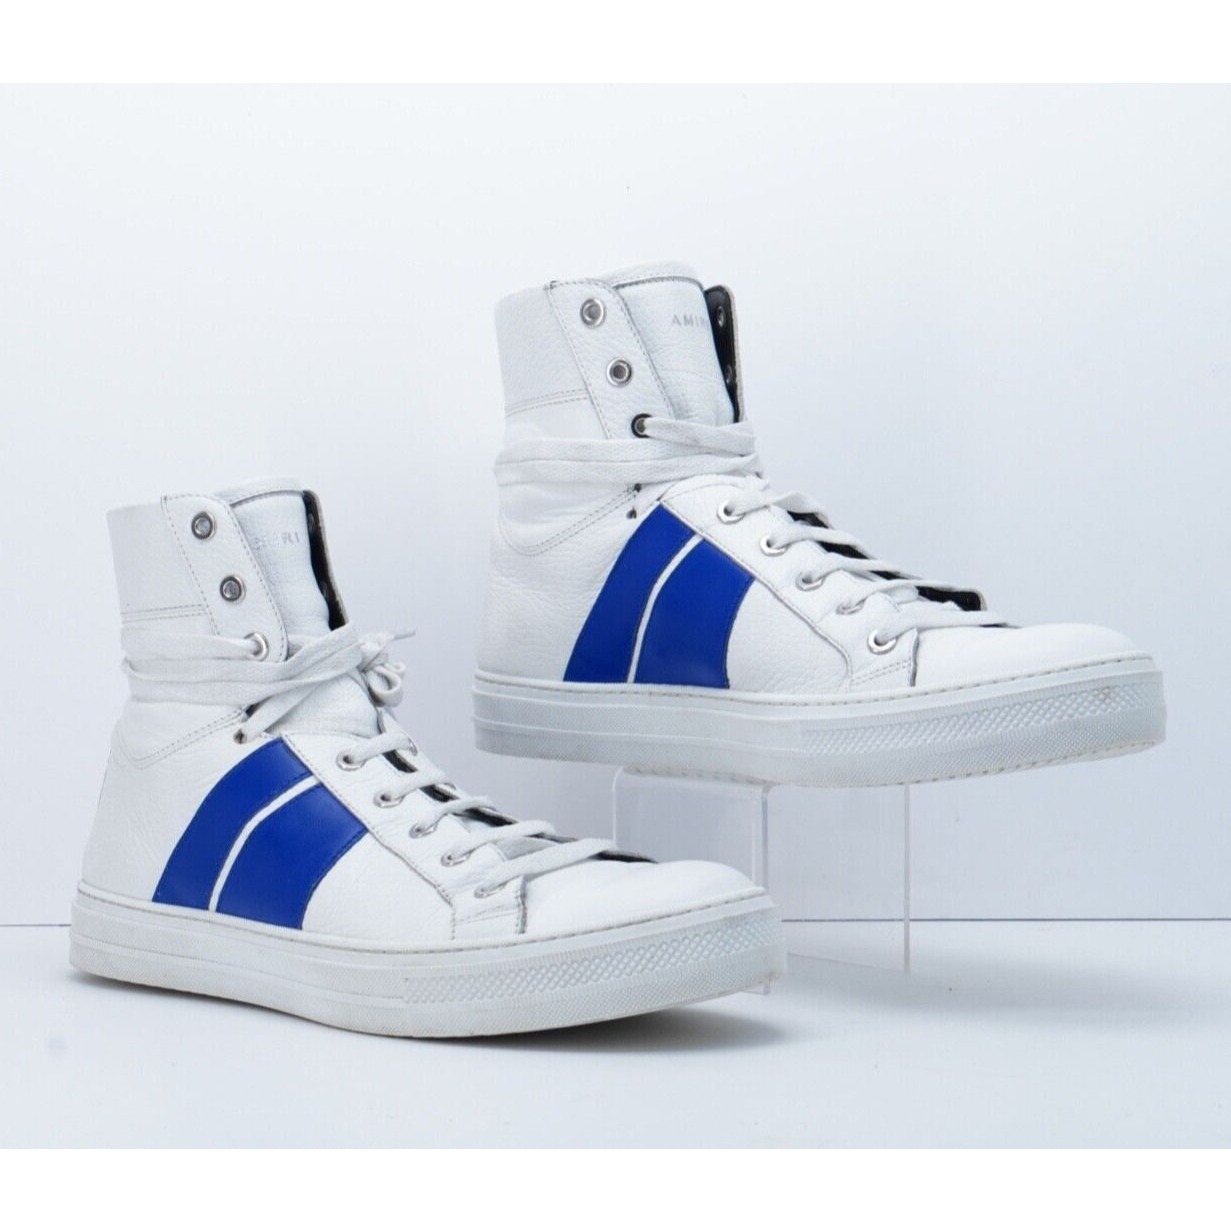 Amiri Sunset Sneakers White Blue High Top Lace Up $595 - Siz - 1